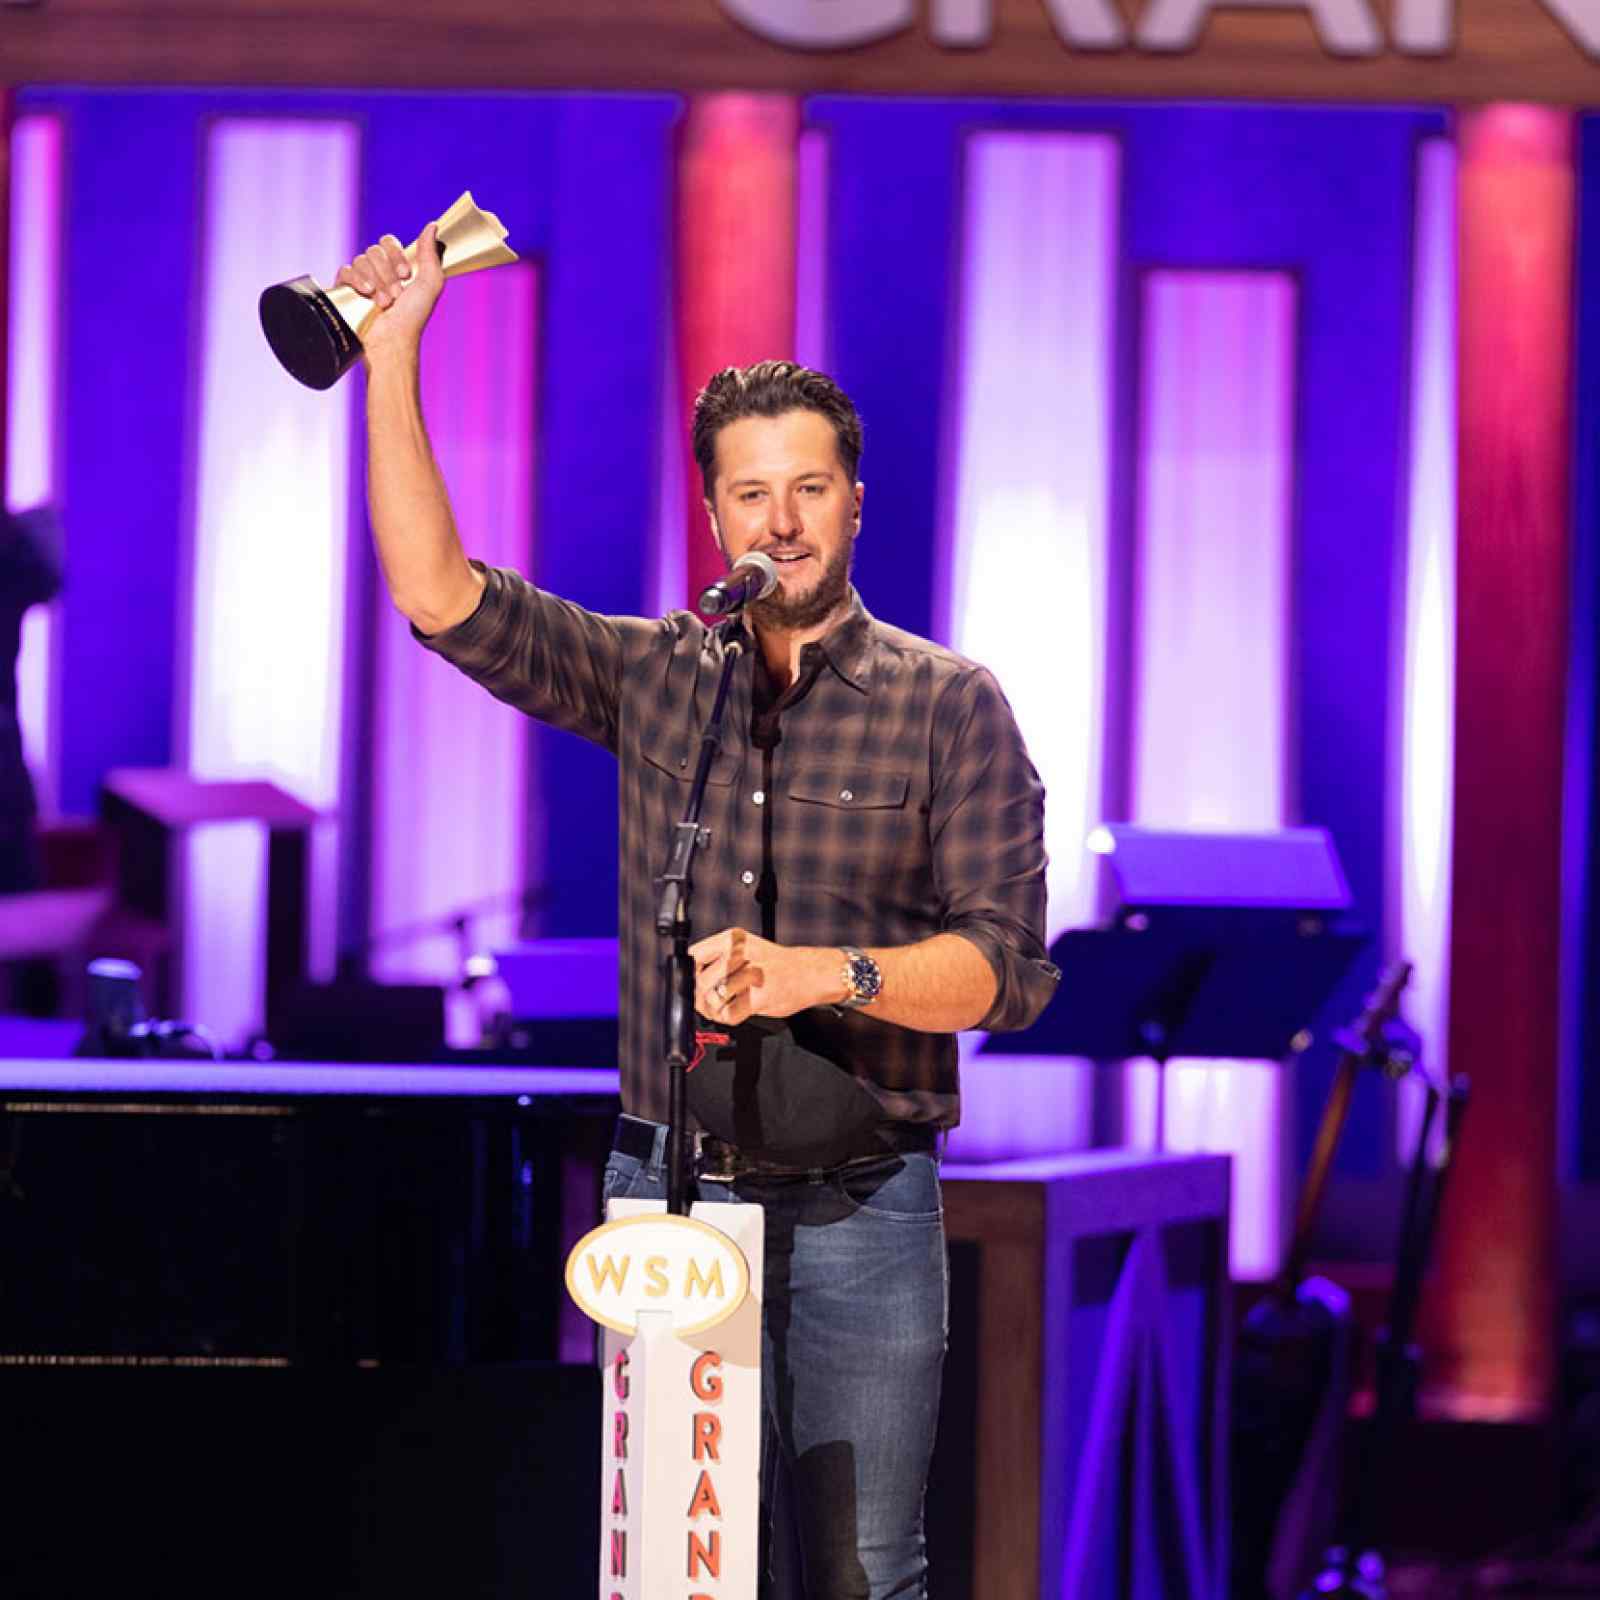 Luke Has A Memorable Night at the Grand Ole Opry